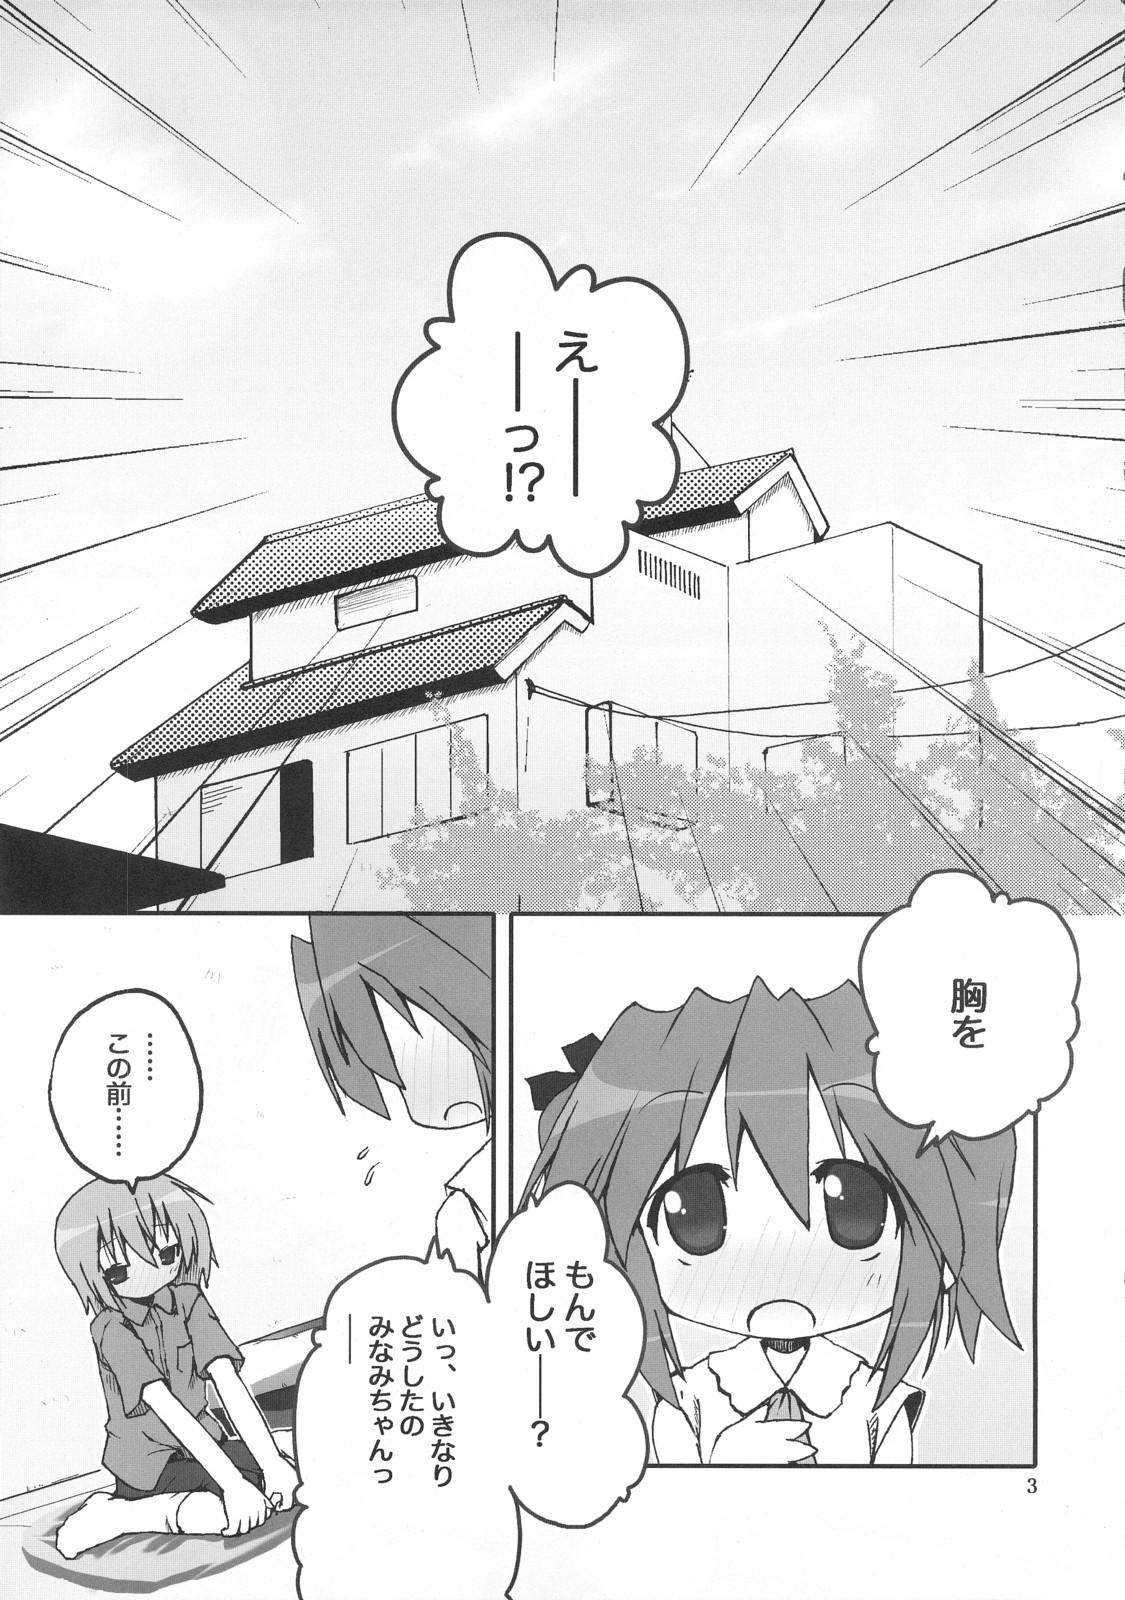 Strapon Hiyorin Break!! - Lucky star Clothed - Page 4